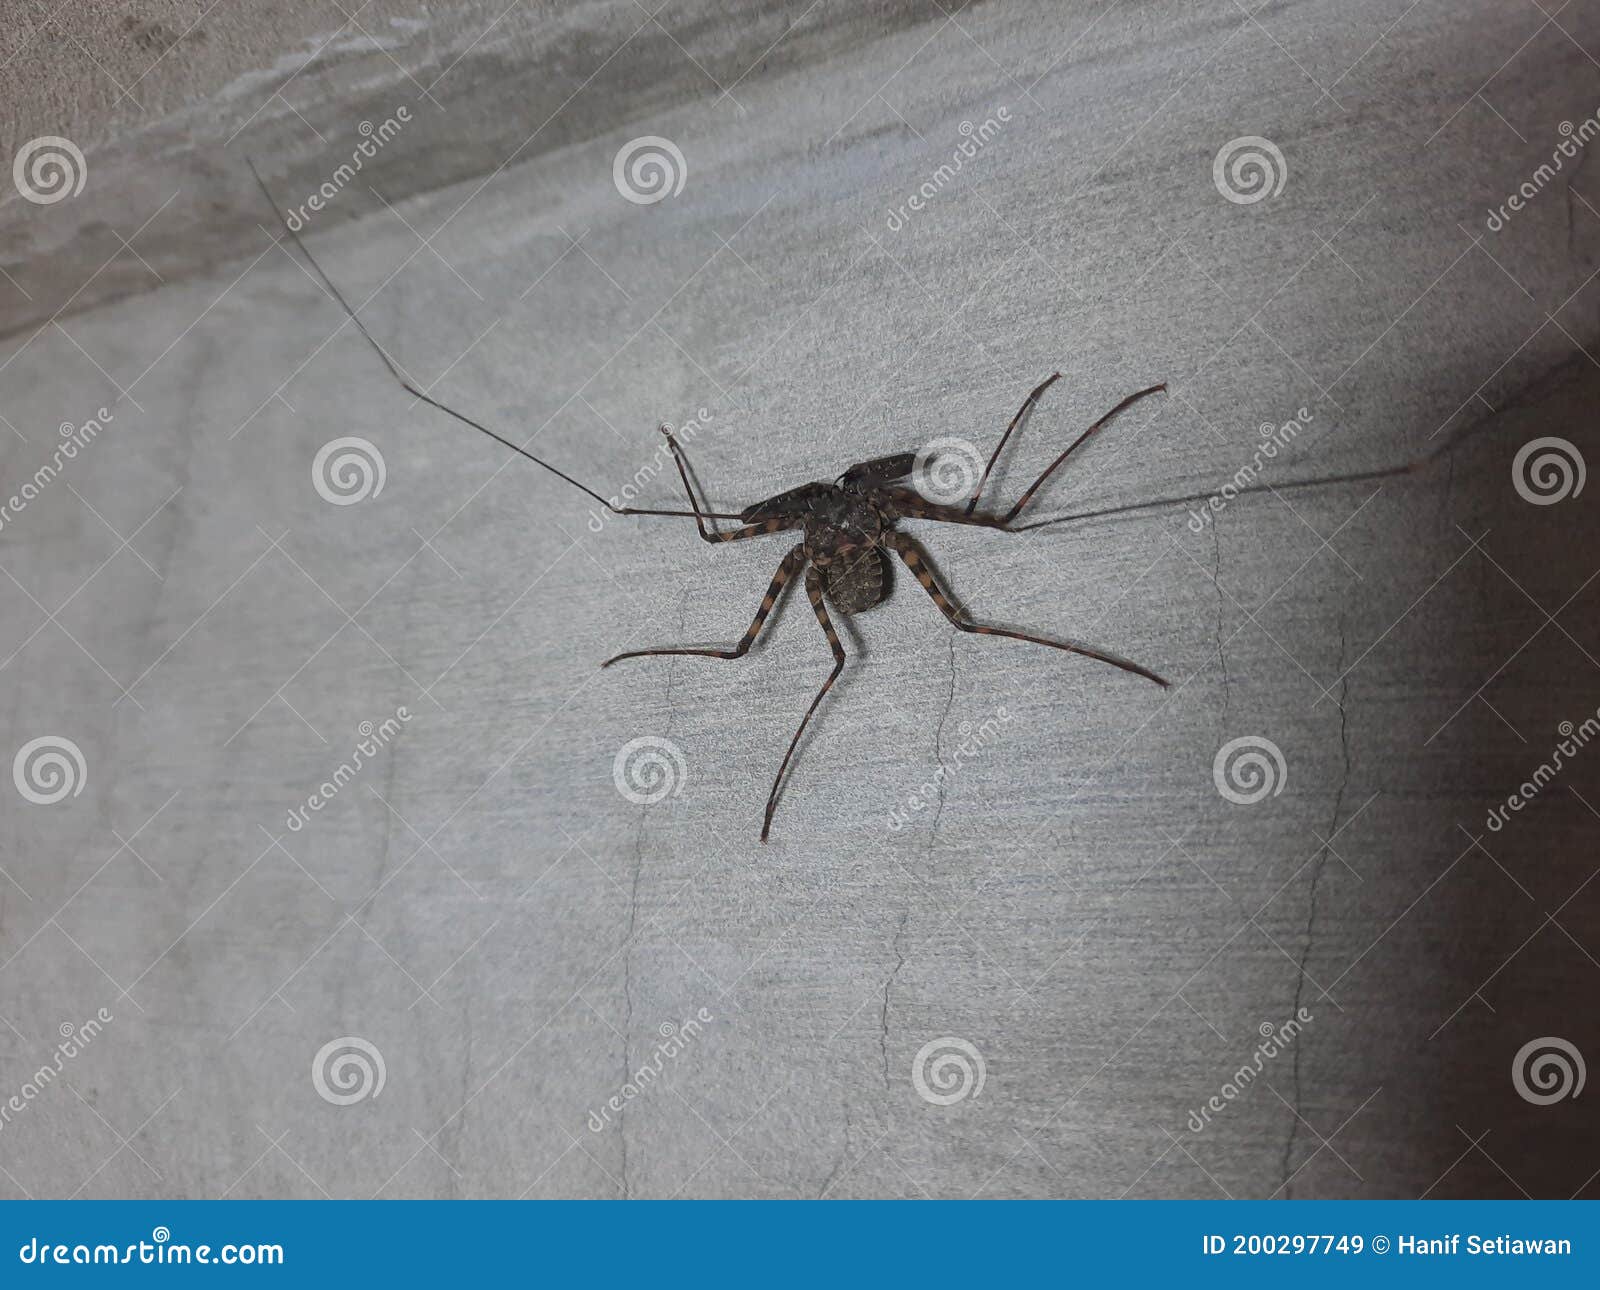 A Black Spider with Very Long Antenna Walking on Grey Plastering Wall ...